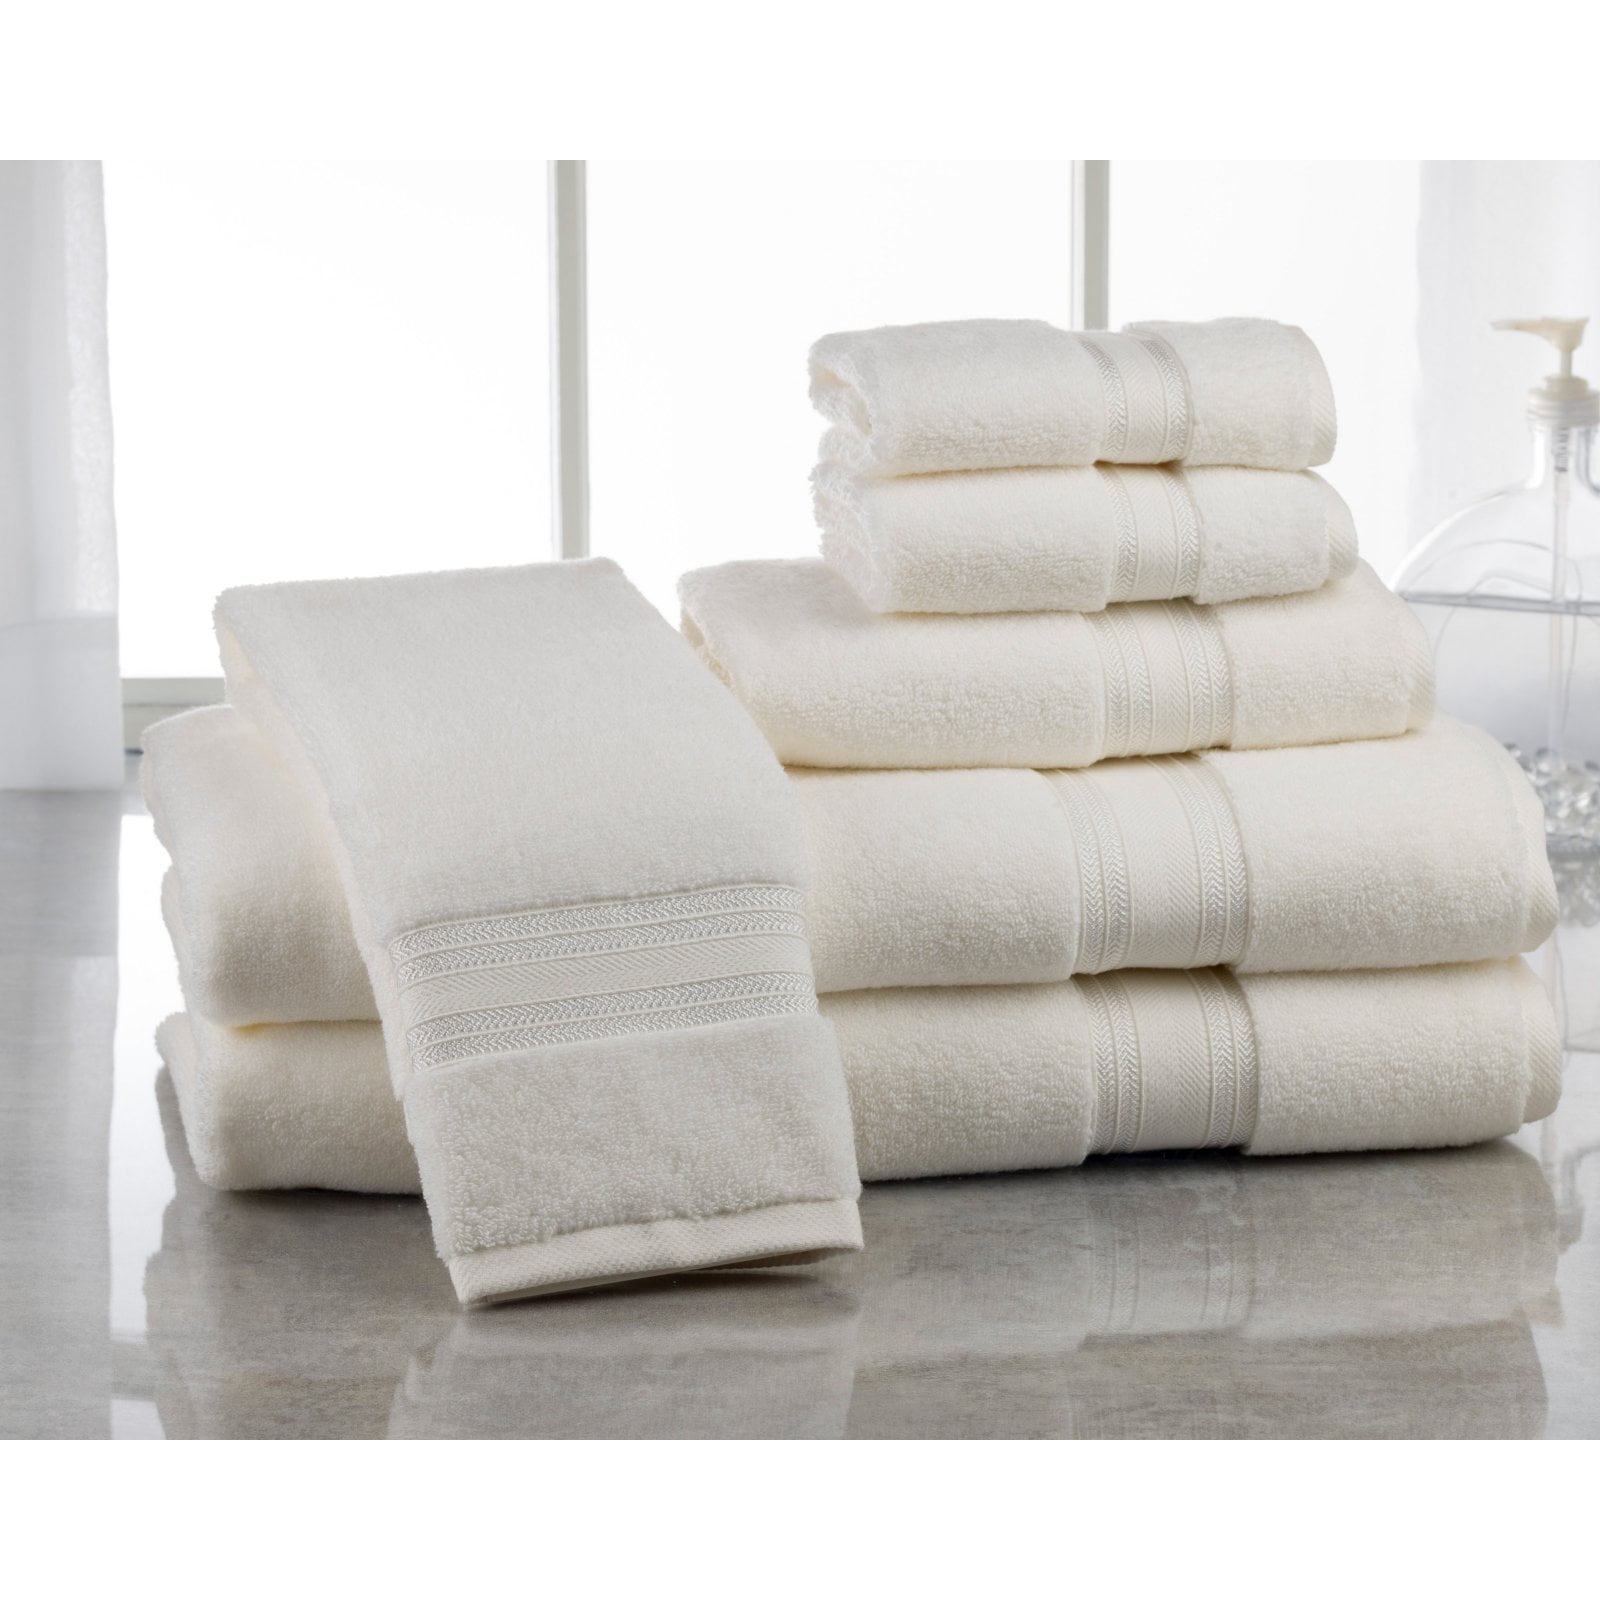  U.S. Polo Assn. Premium 6-Piece Zero-Twist Towel Set - 2 Bath  Towels, 2 Hand Towels and 2 Face Towels - Highly Absorbent, Fast Drying and  Super Soft Hotel Quality 100% Cotton